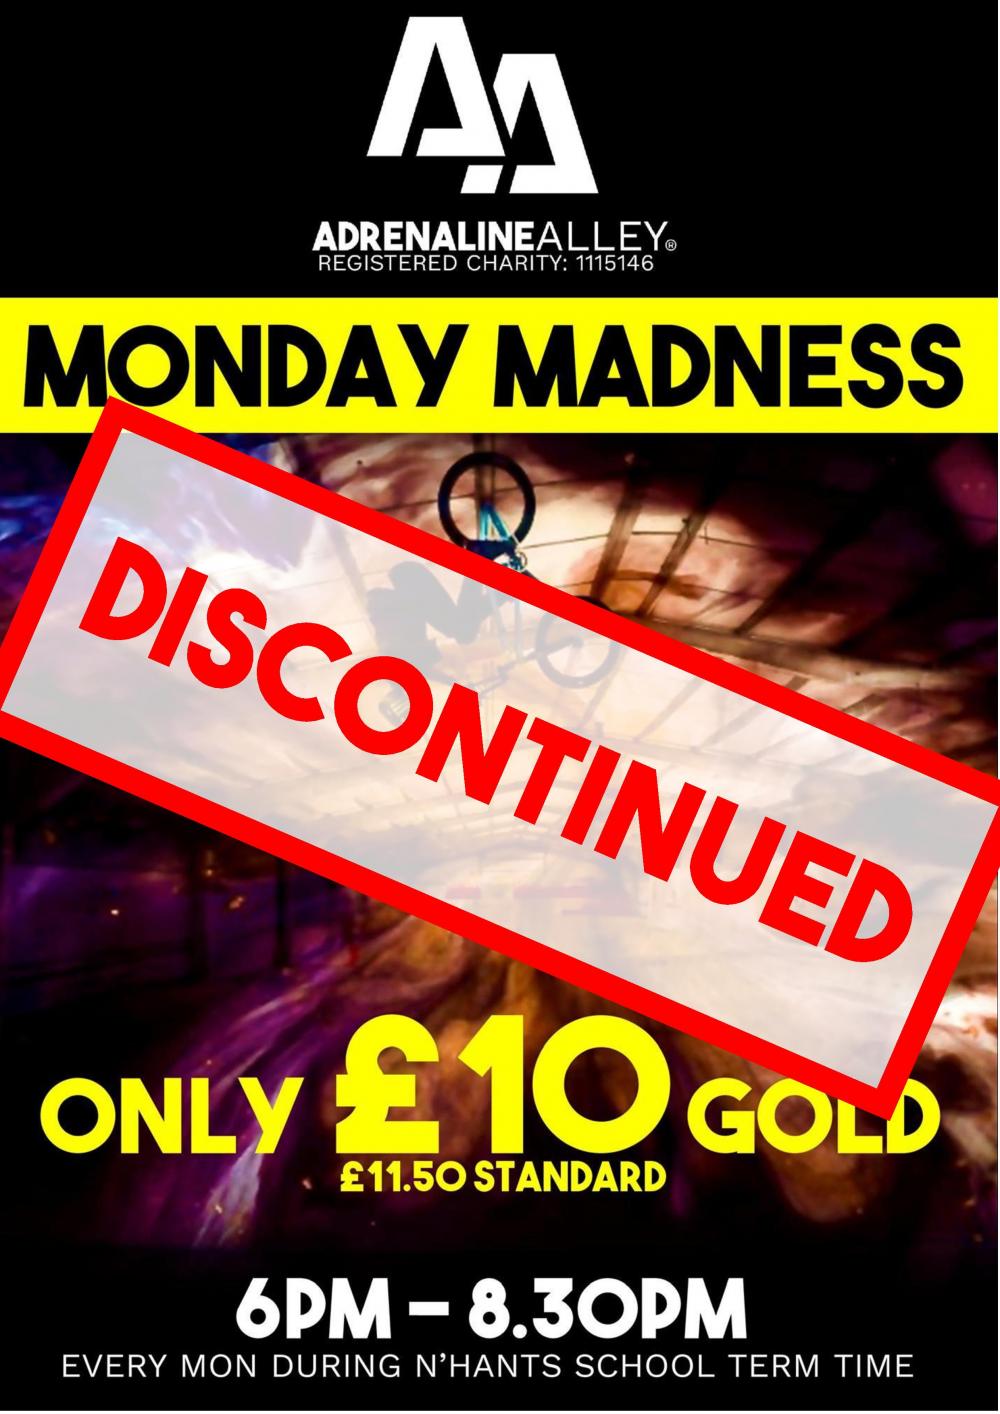 MONDAY MADNESS - DISCONTINUED